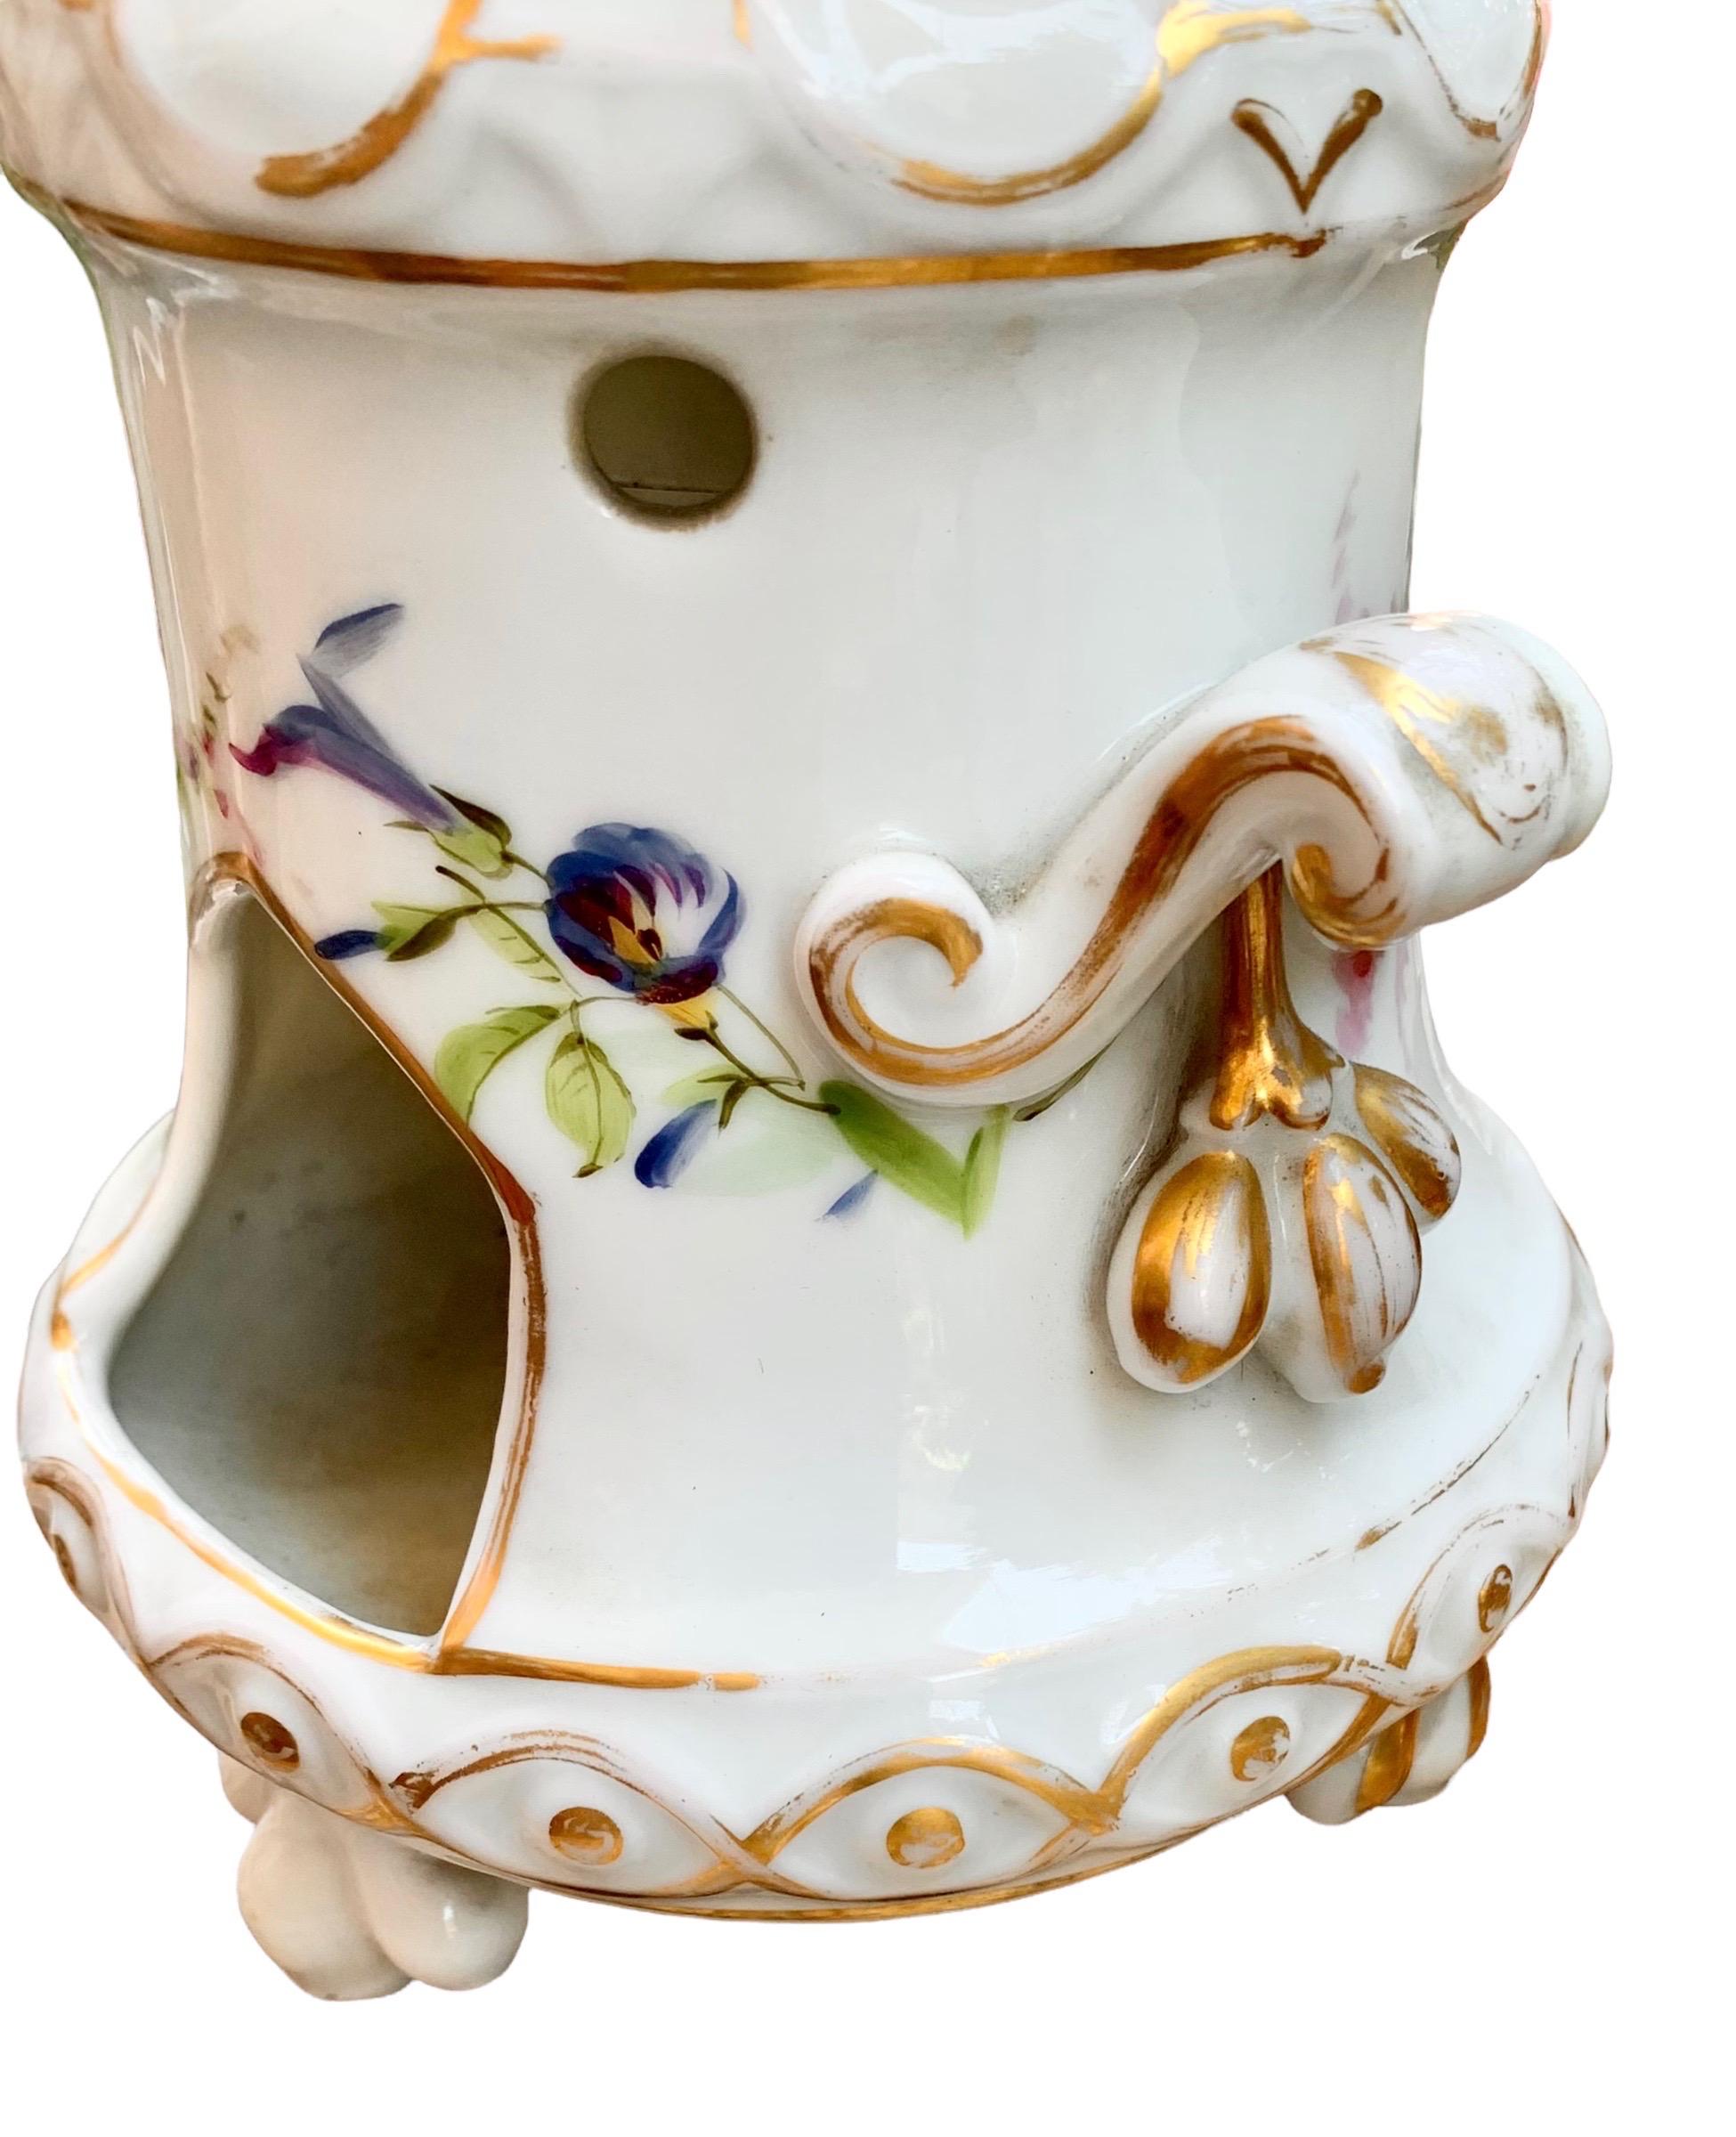 A fine 19th century Hand-painted and gilt decorated porcelain veilleuse, depicting floral studies. It rests on three tripodal feet and has lovely scroll handles and clusters of fruit.

In the warming stand one would have placed a candle or oil to